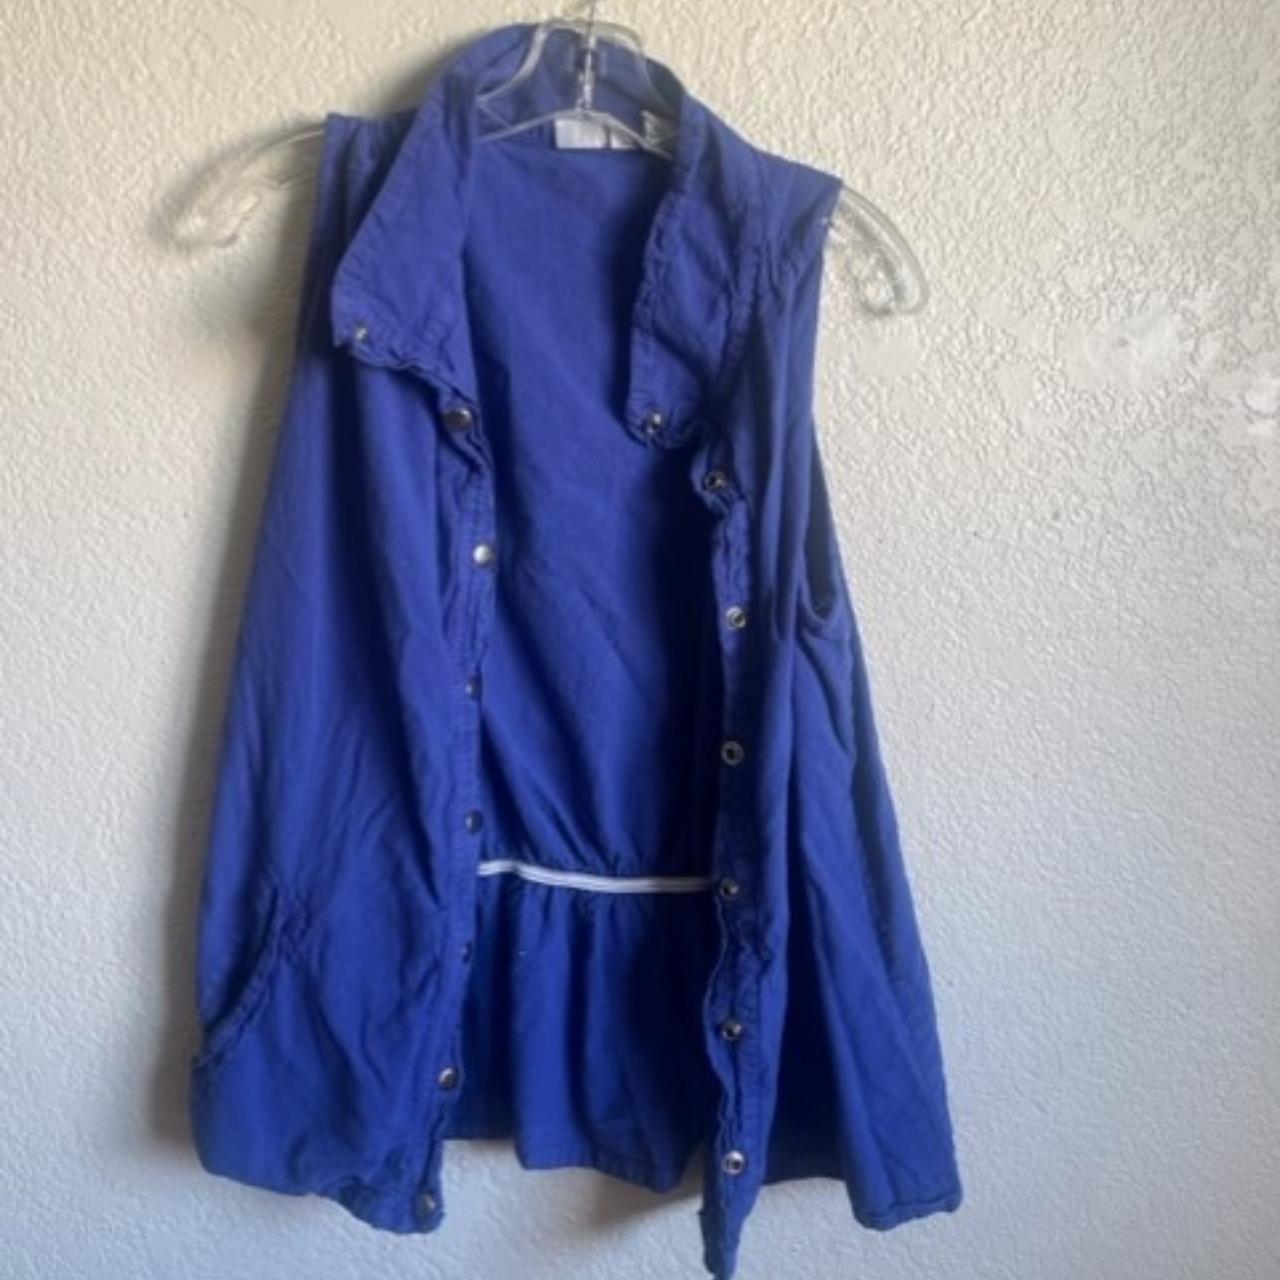 item listed by tallbxtchthrift